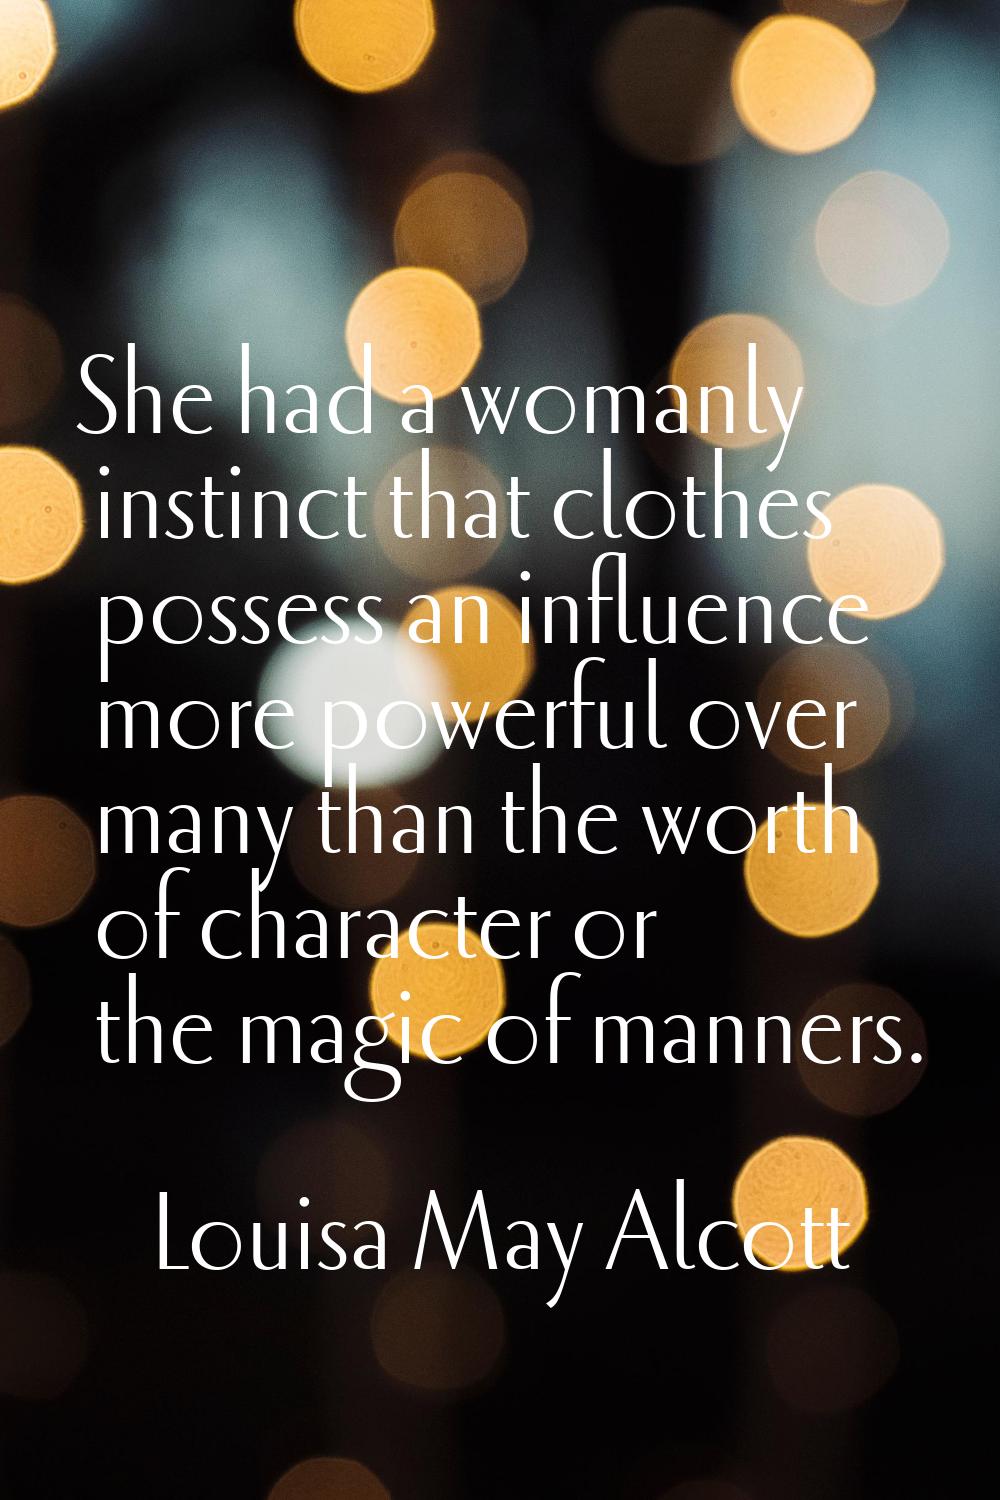 She had a womanly instinct that clothes possess an influence more powerful over many than the worth